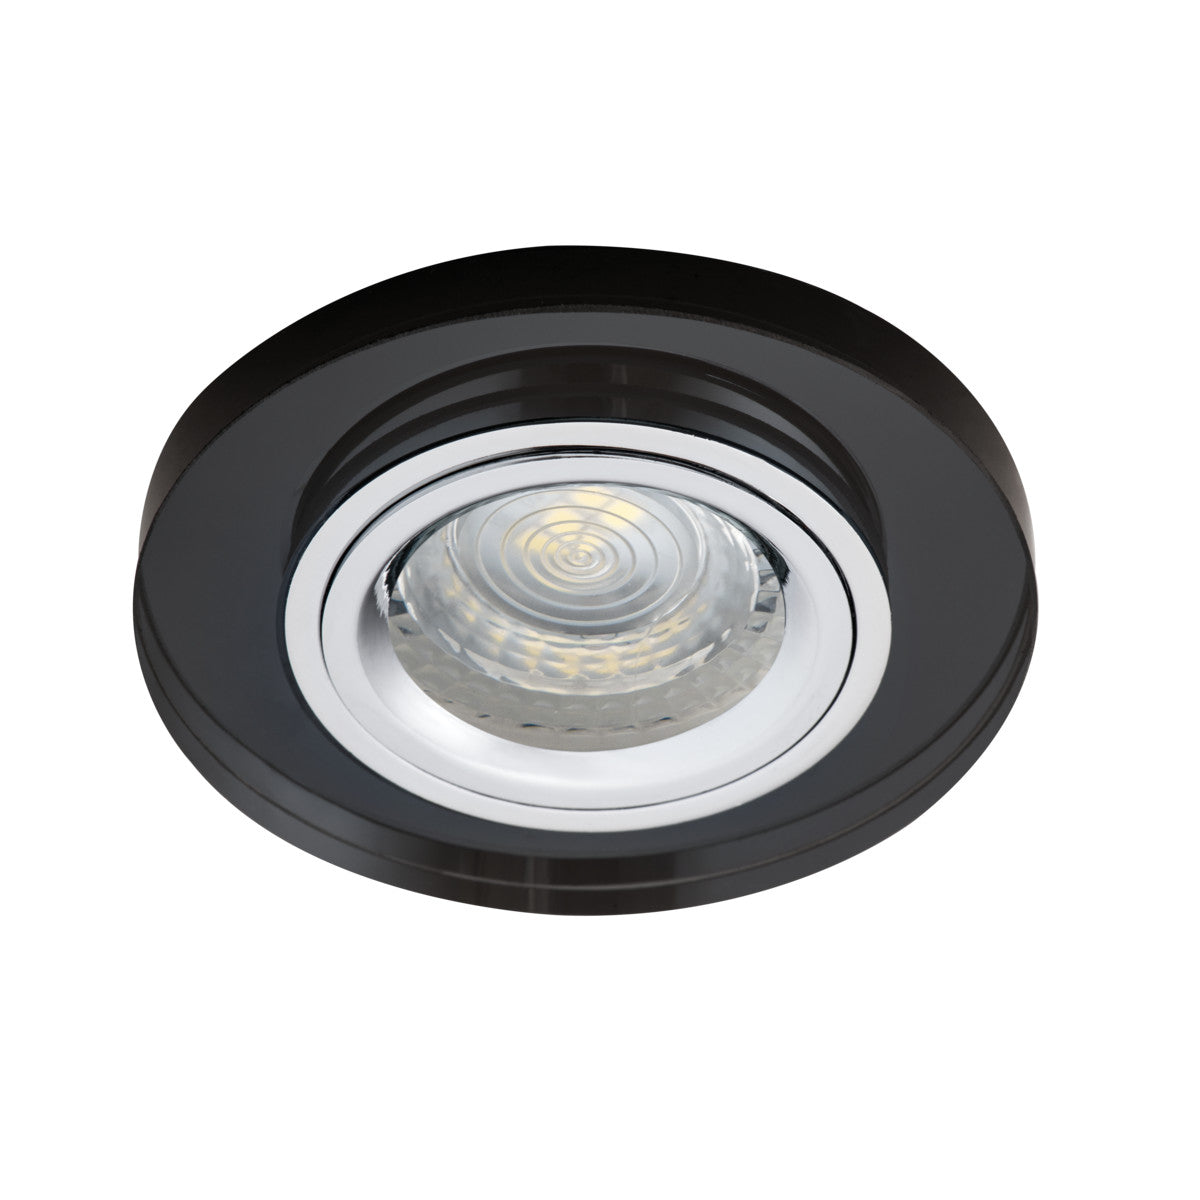 Kanlux MORTA Fixed Ceiling Recessed Mounted GU10 Spot Light Fitting